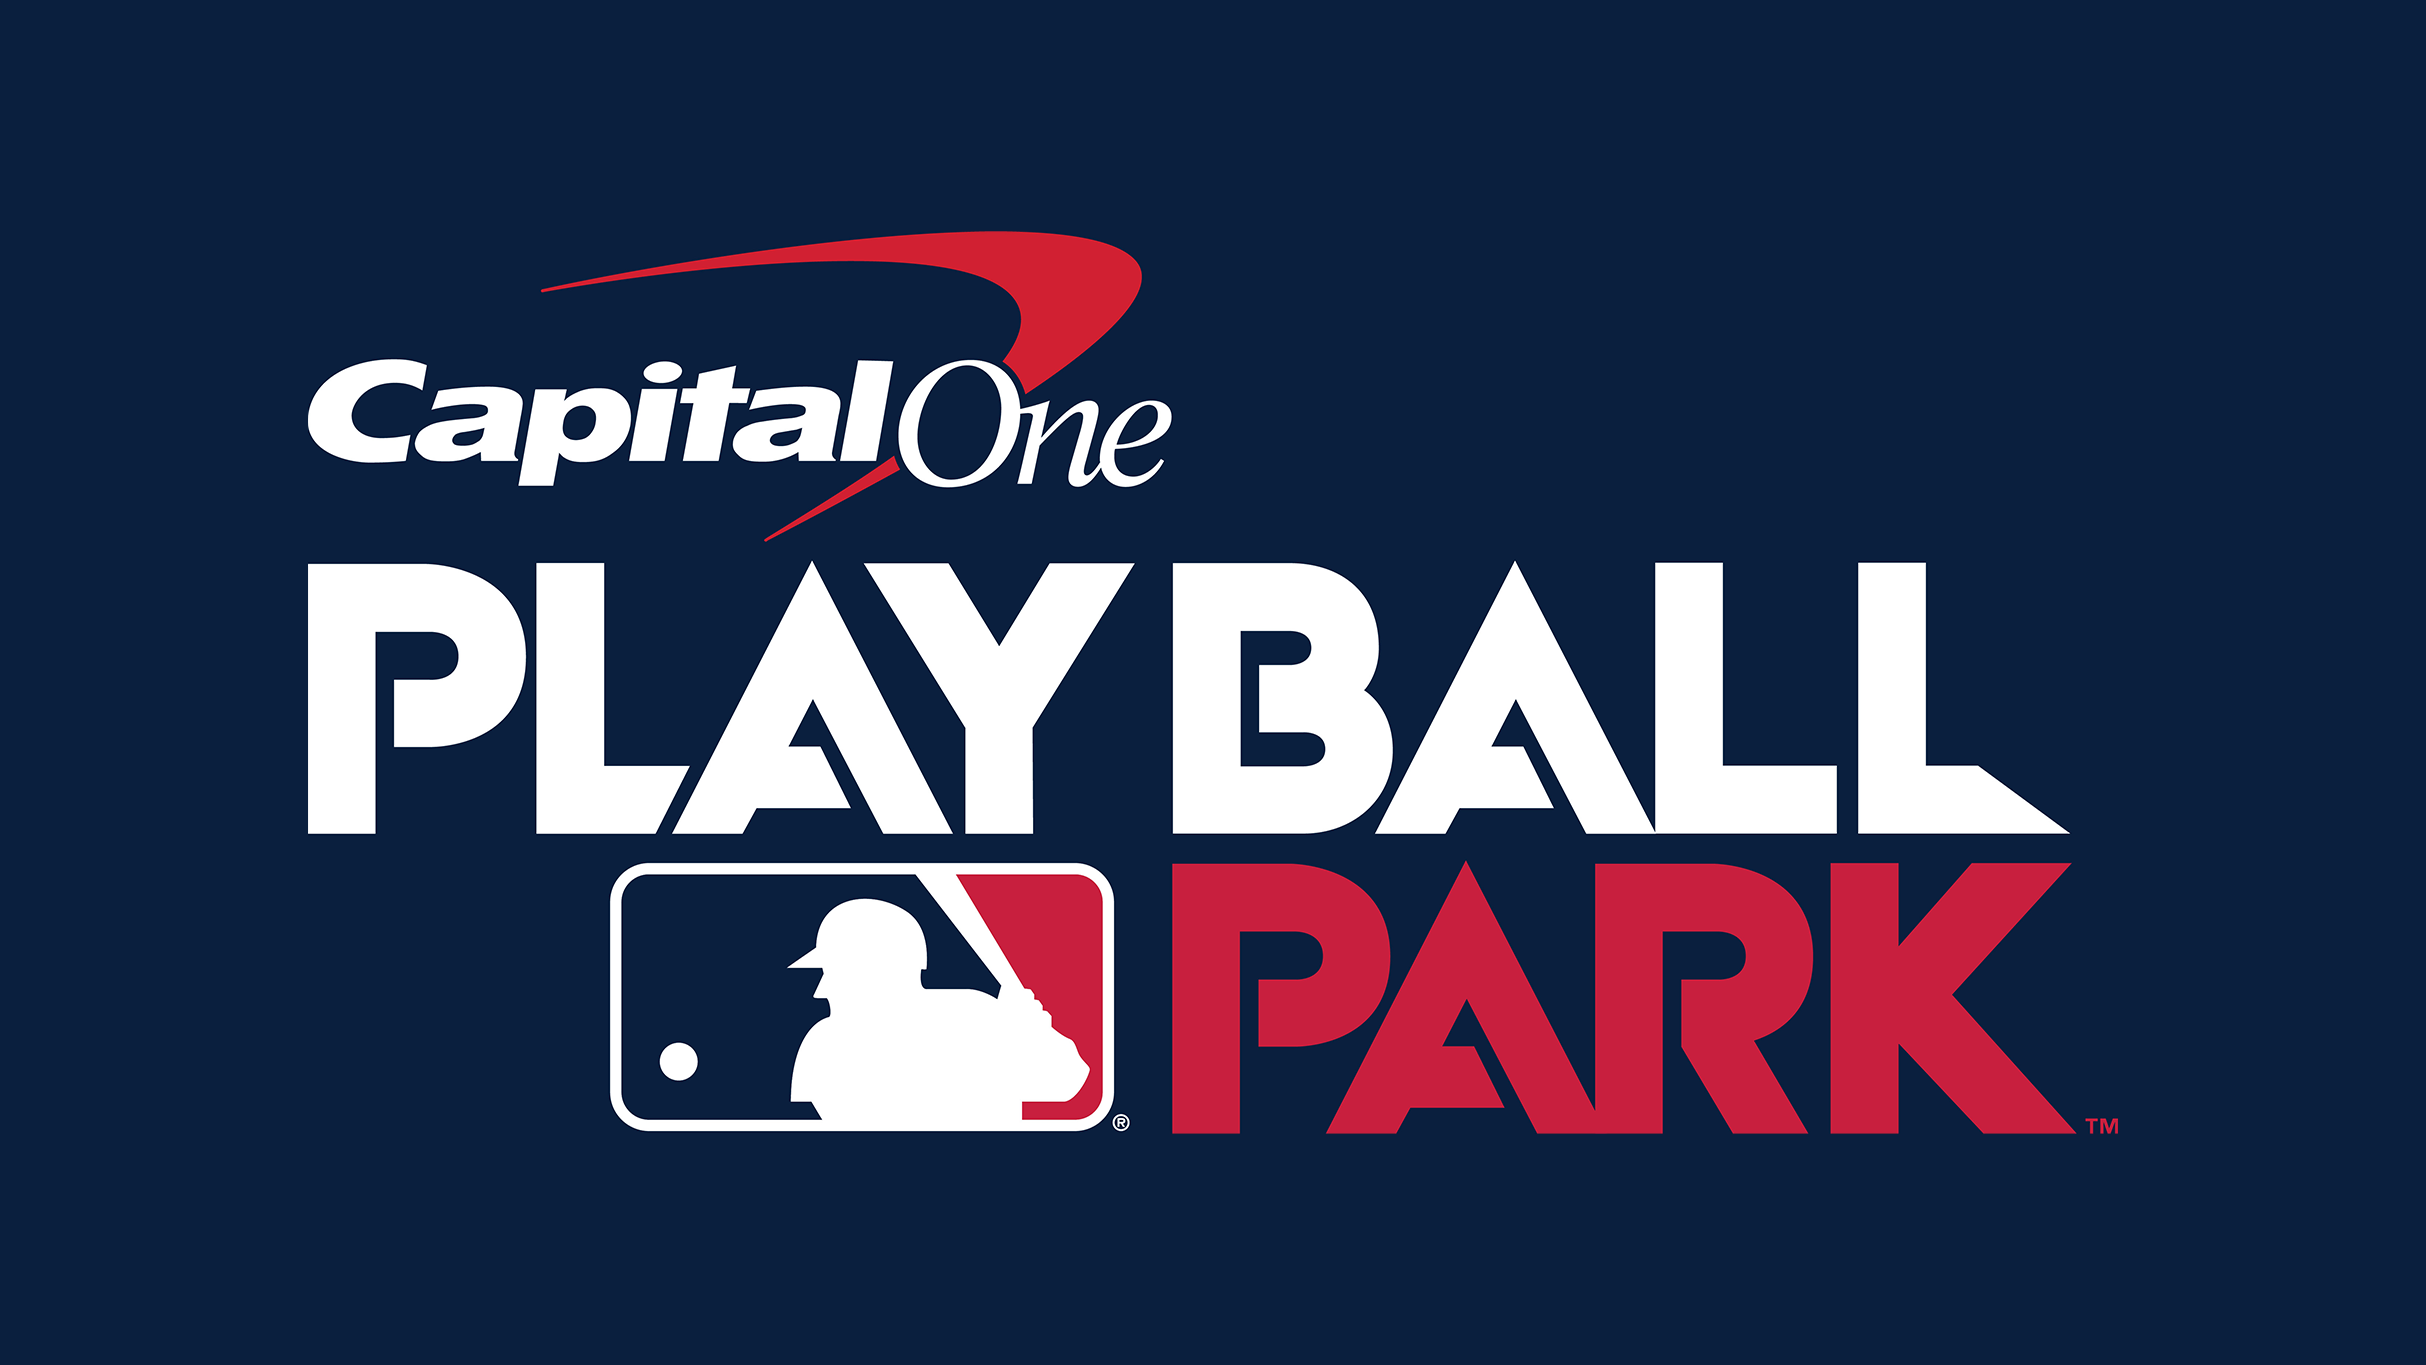 Capital One PLAY BALL PARK in Seattle promo photo for Capital One Card Holder  presale offer code